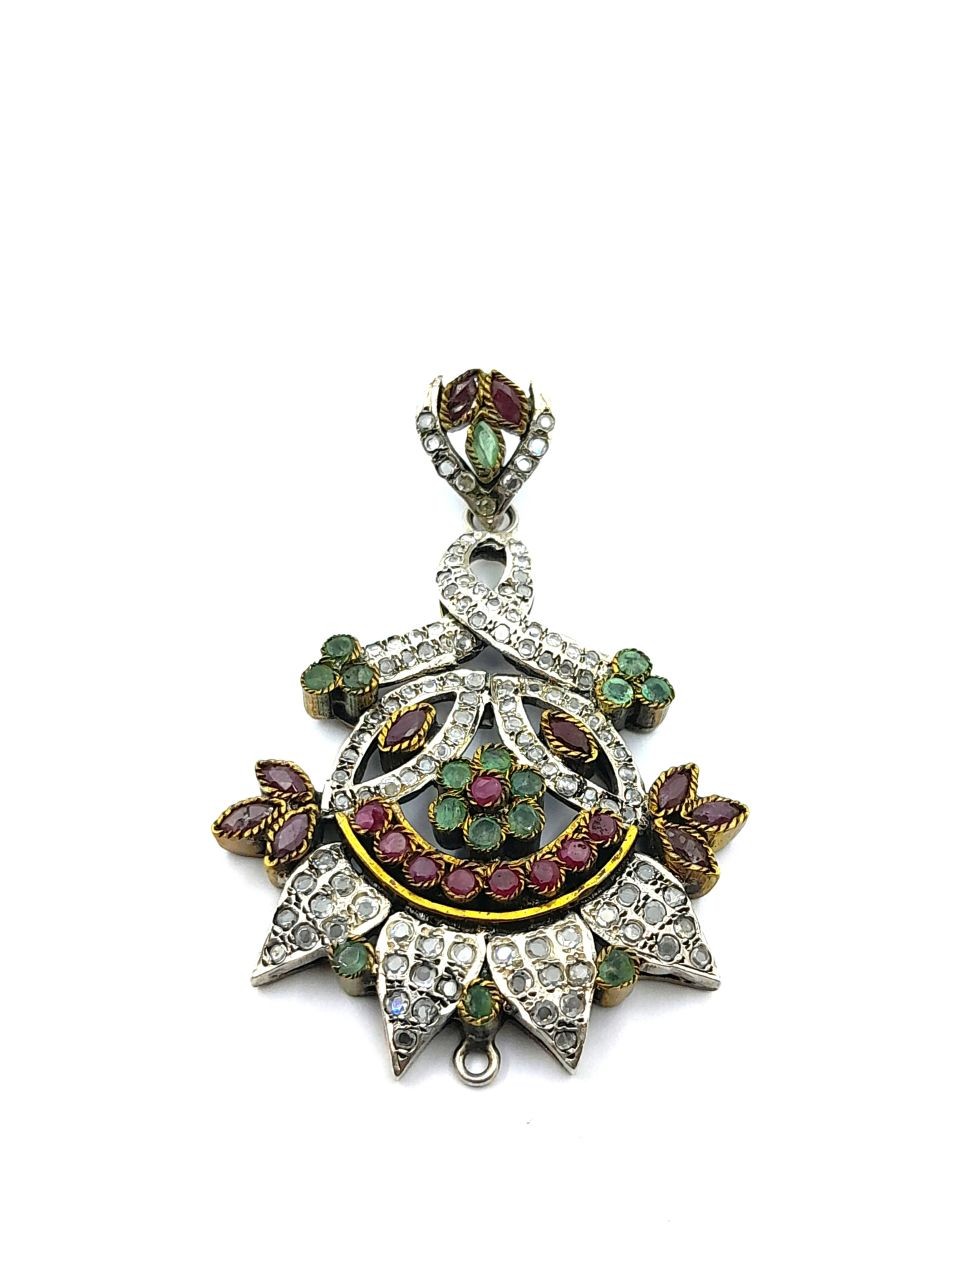 A pendant made of rubies and emeralds